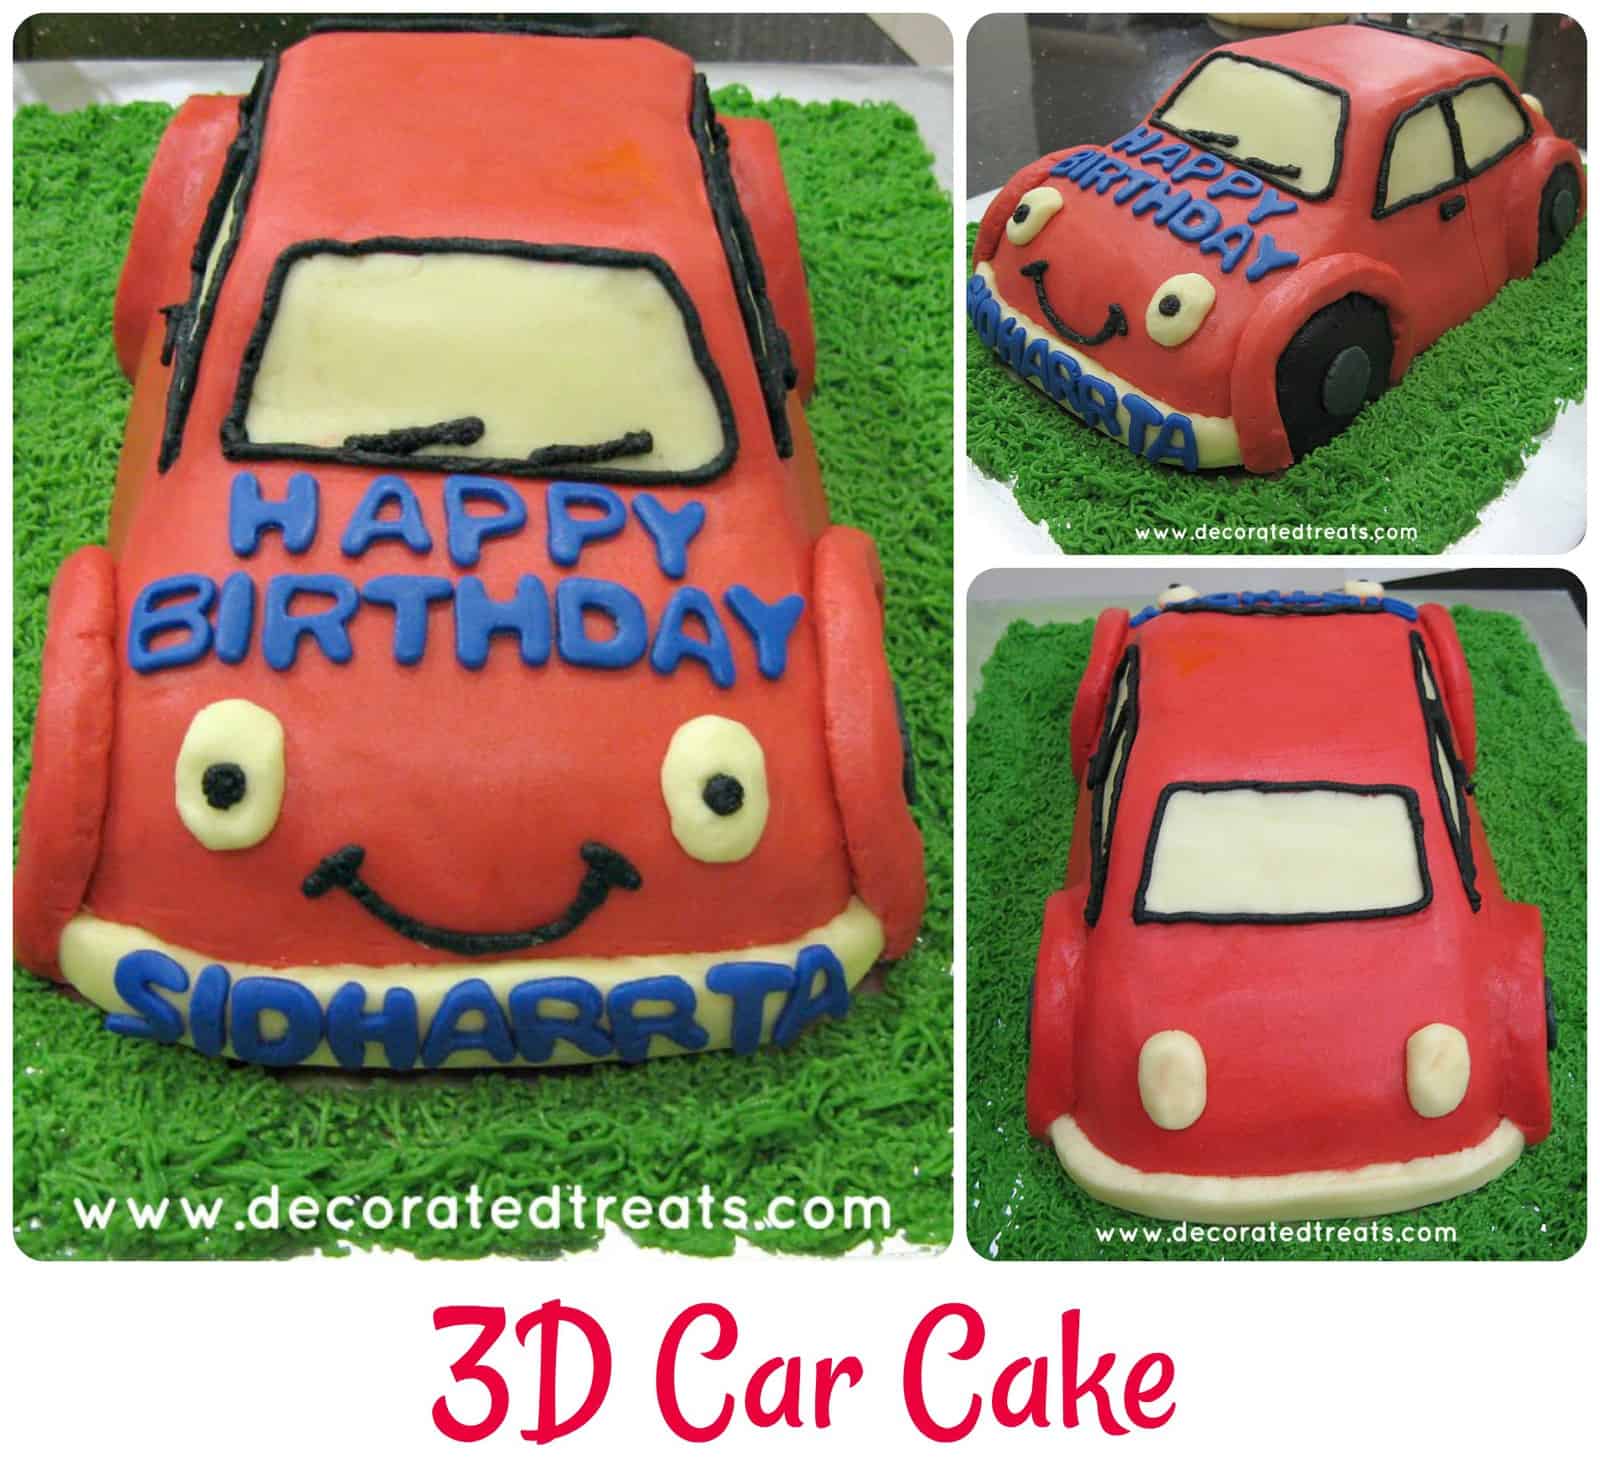 A 3d shaped car cake in red icing